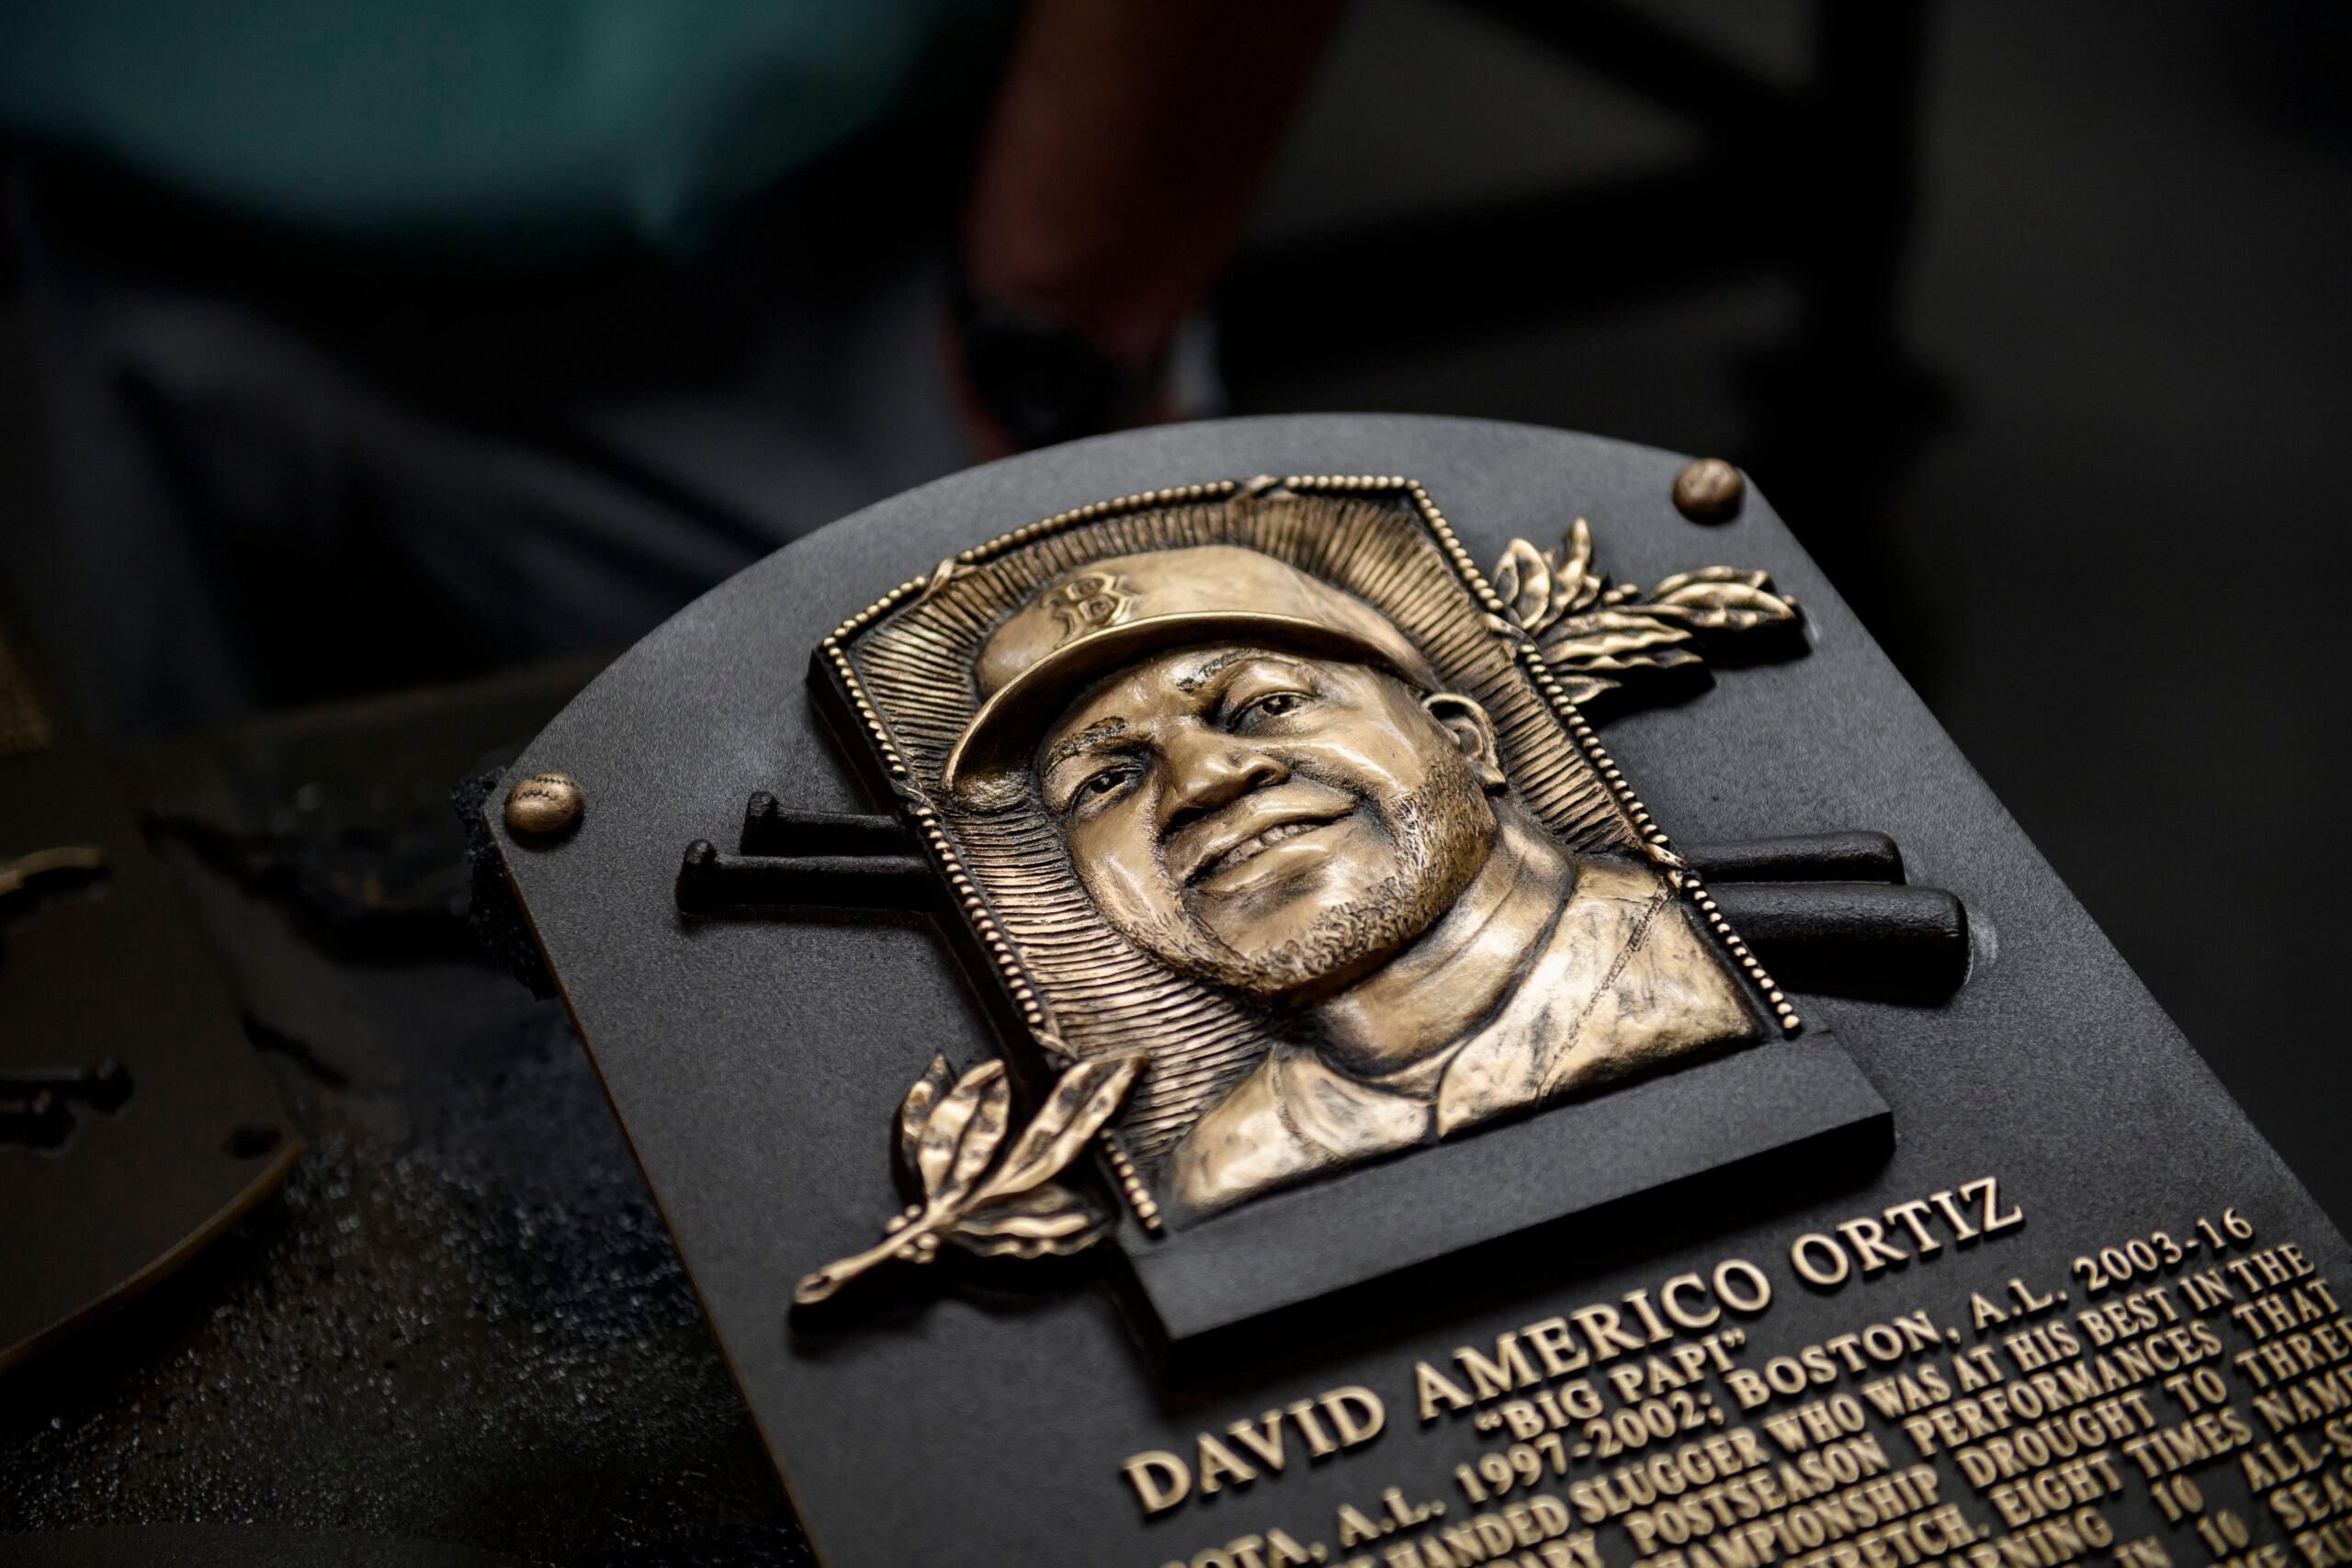 First look at David Ortiz's Hall of Fame plaque